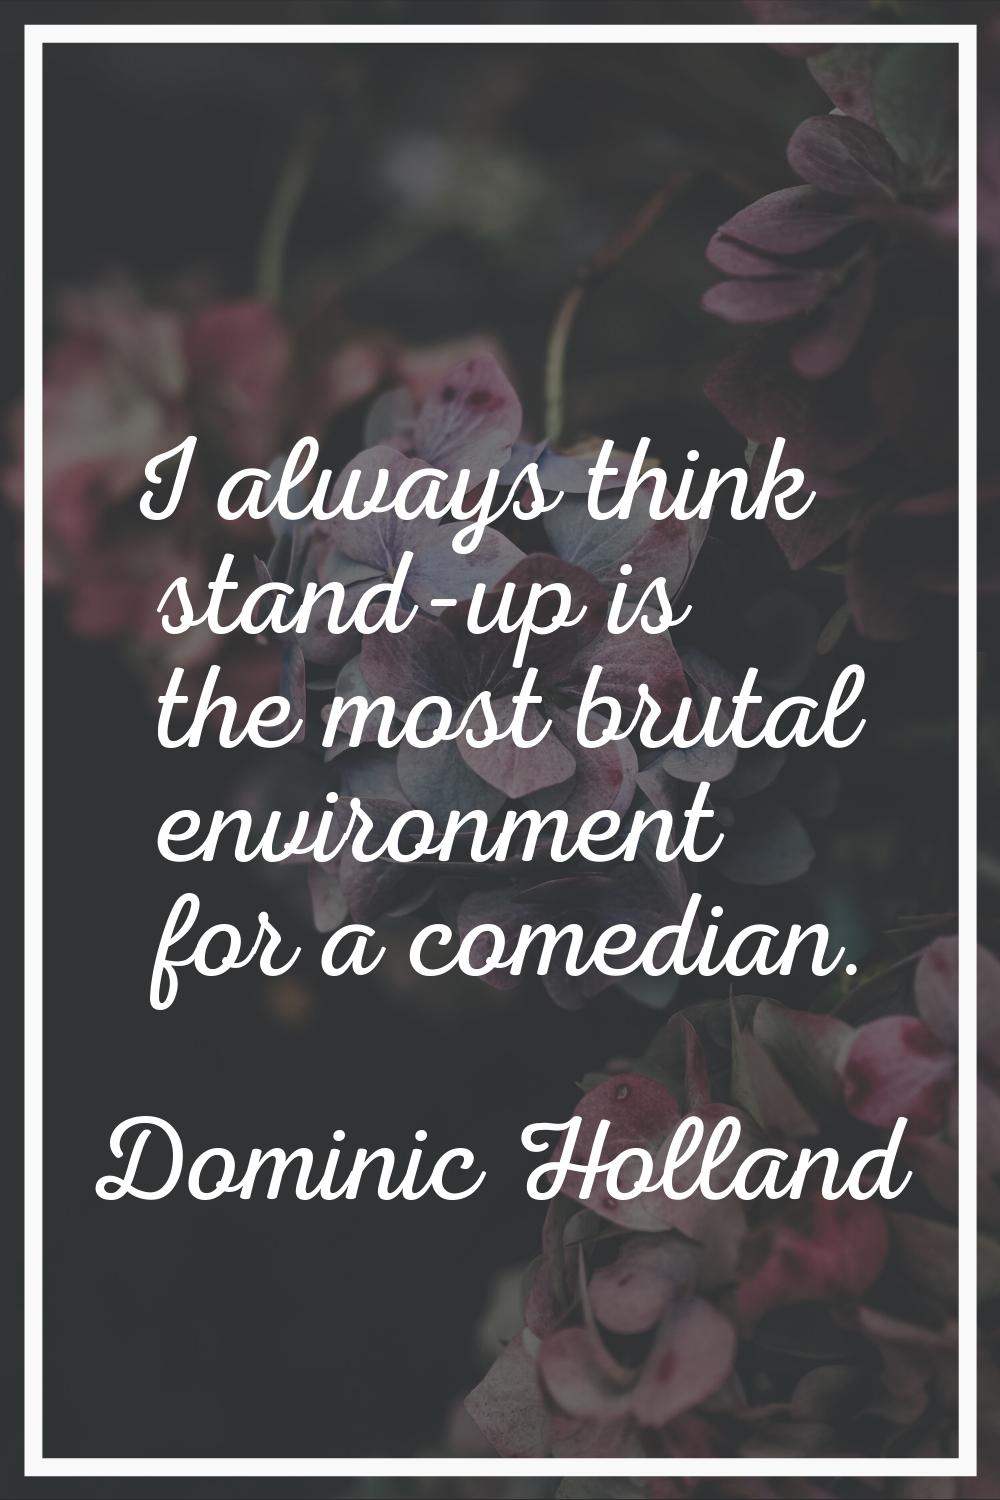 I always think stand-up is the most brutal environment for a comedian.